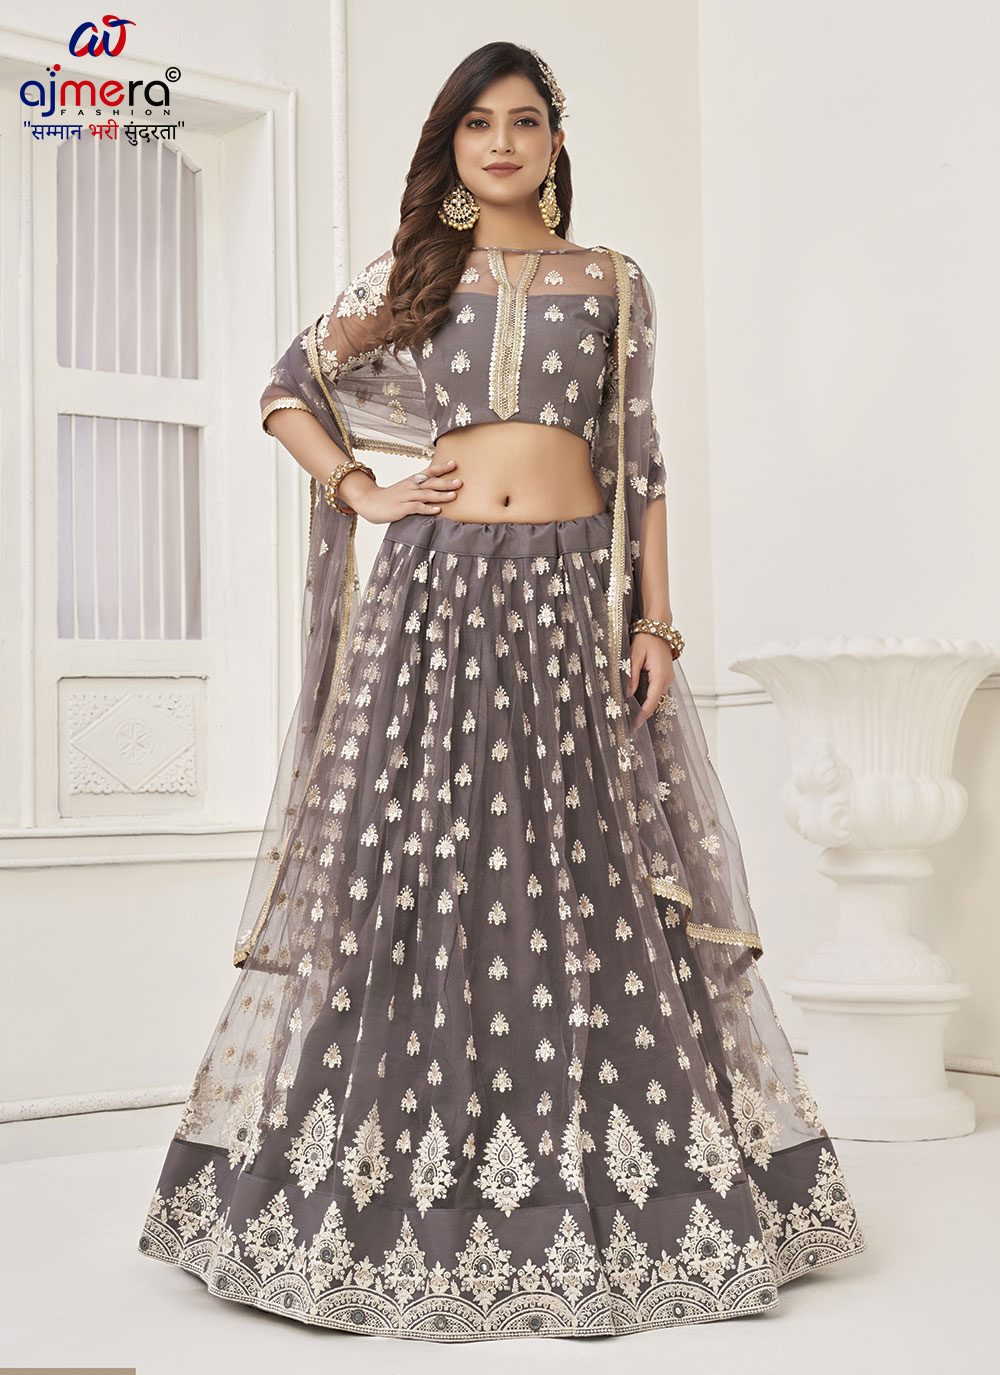 Net Pair Lehnga (2) Manufacturers, Suppliers in Gwalior